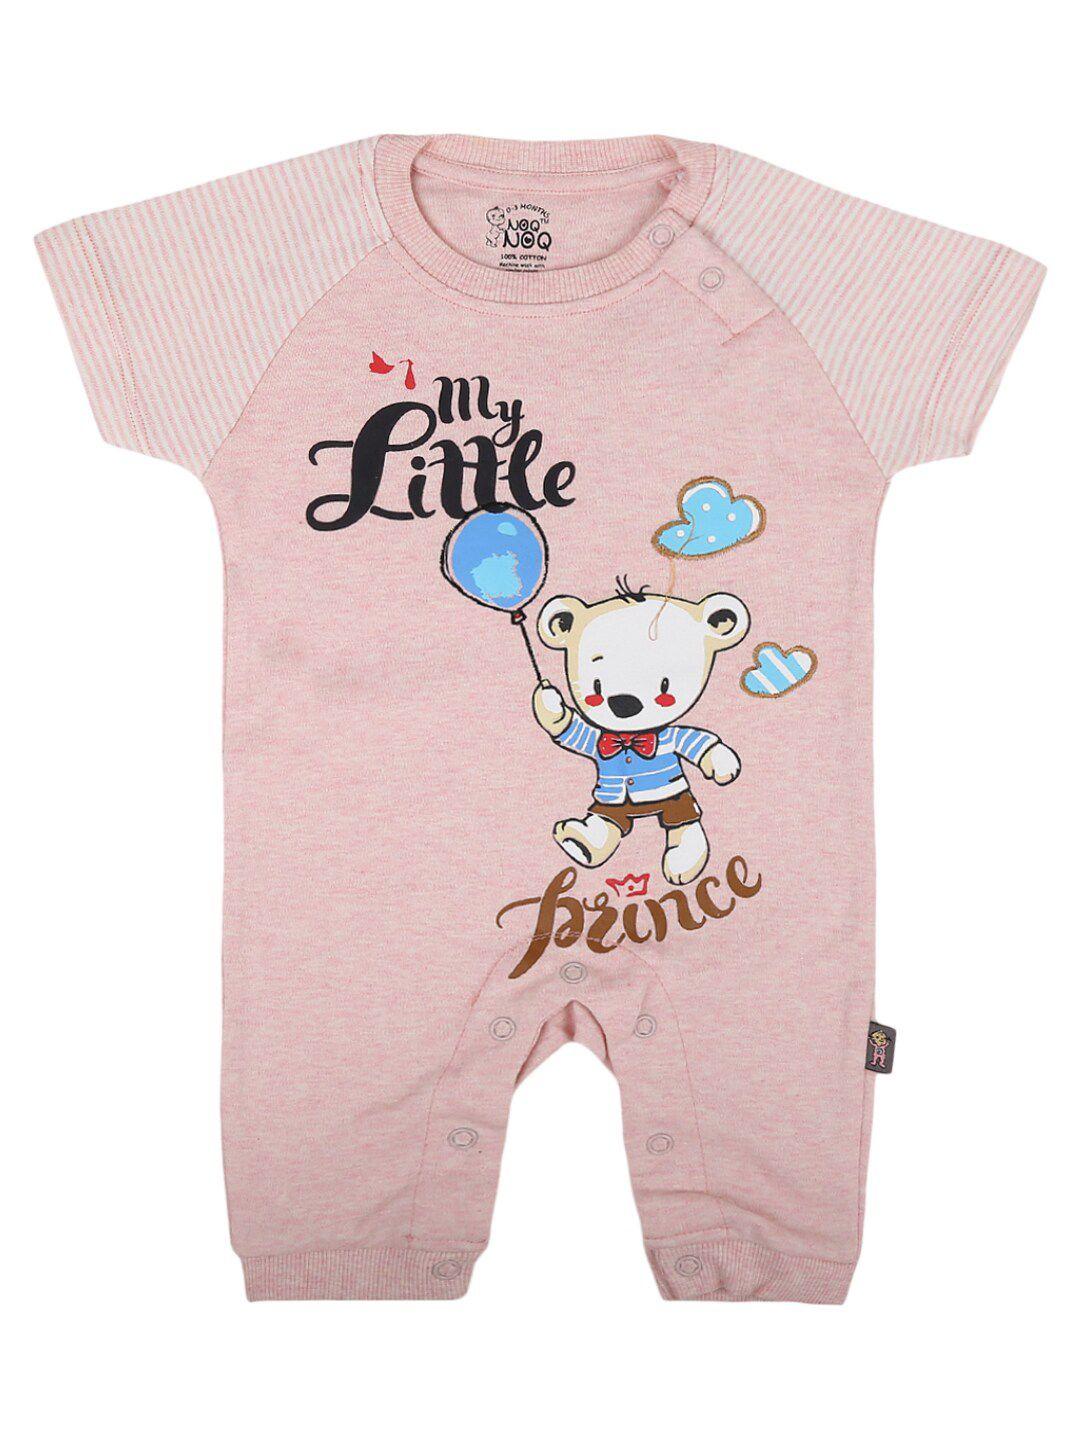 v-mart-kids-pink-&-white-printed-pure-cotton-rompers